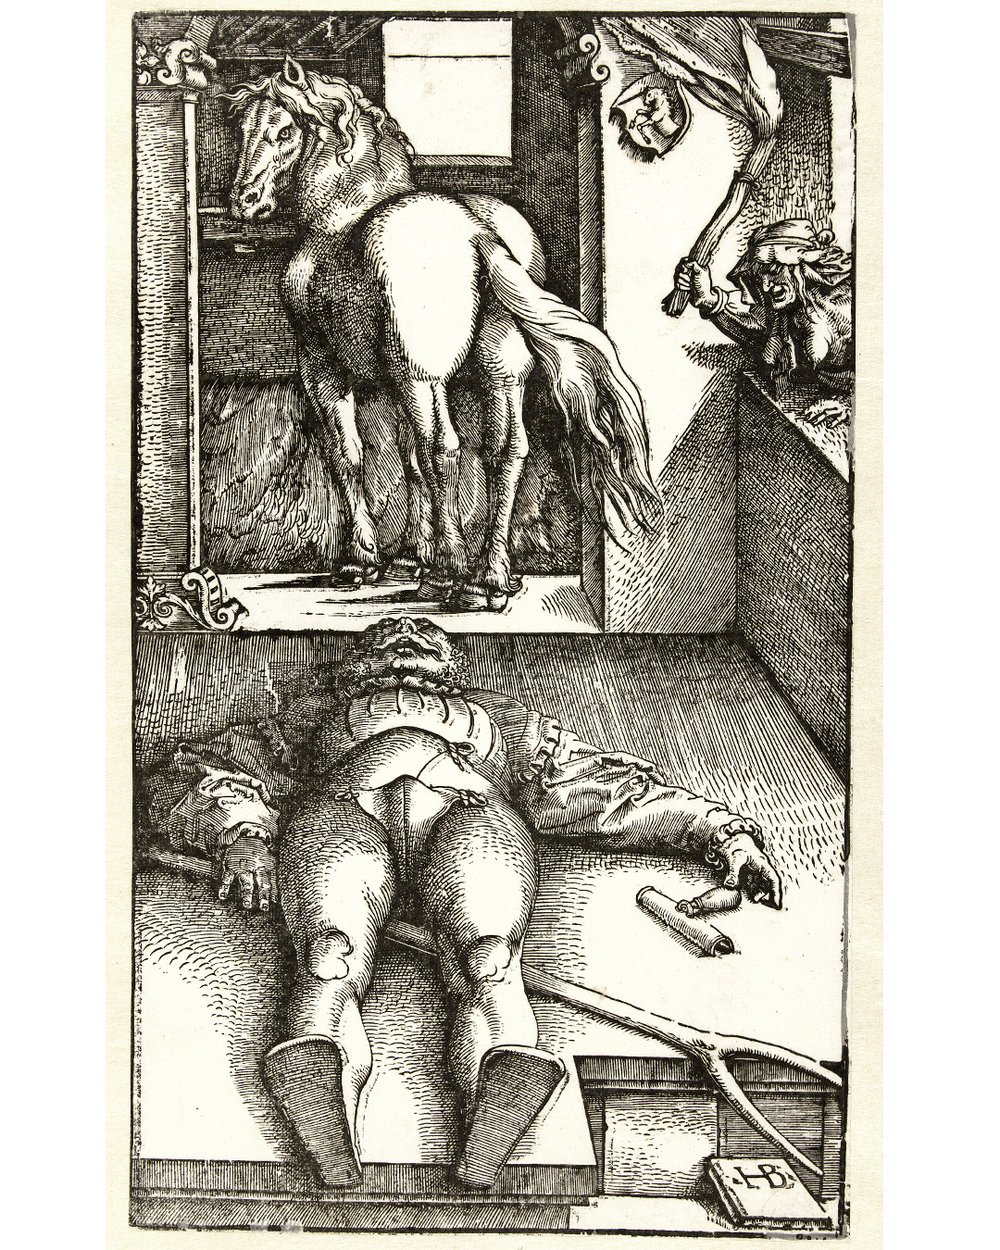 "The stable boy sleeping with the witch and the horse"